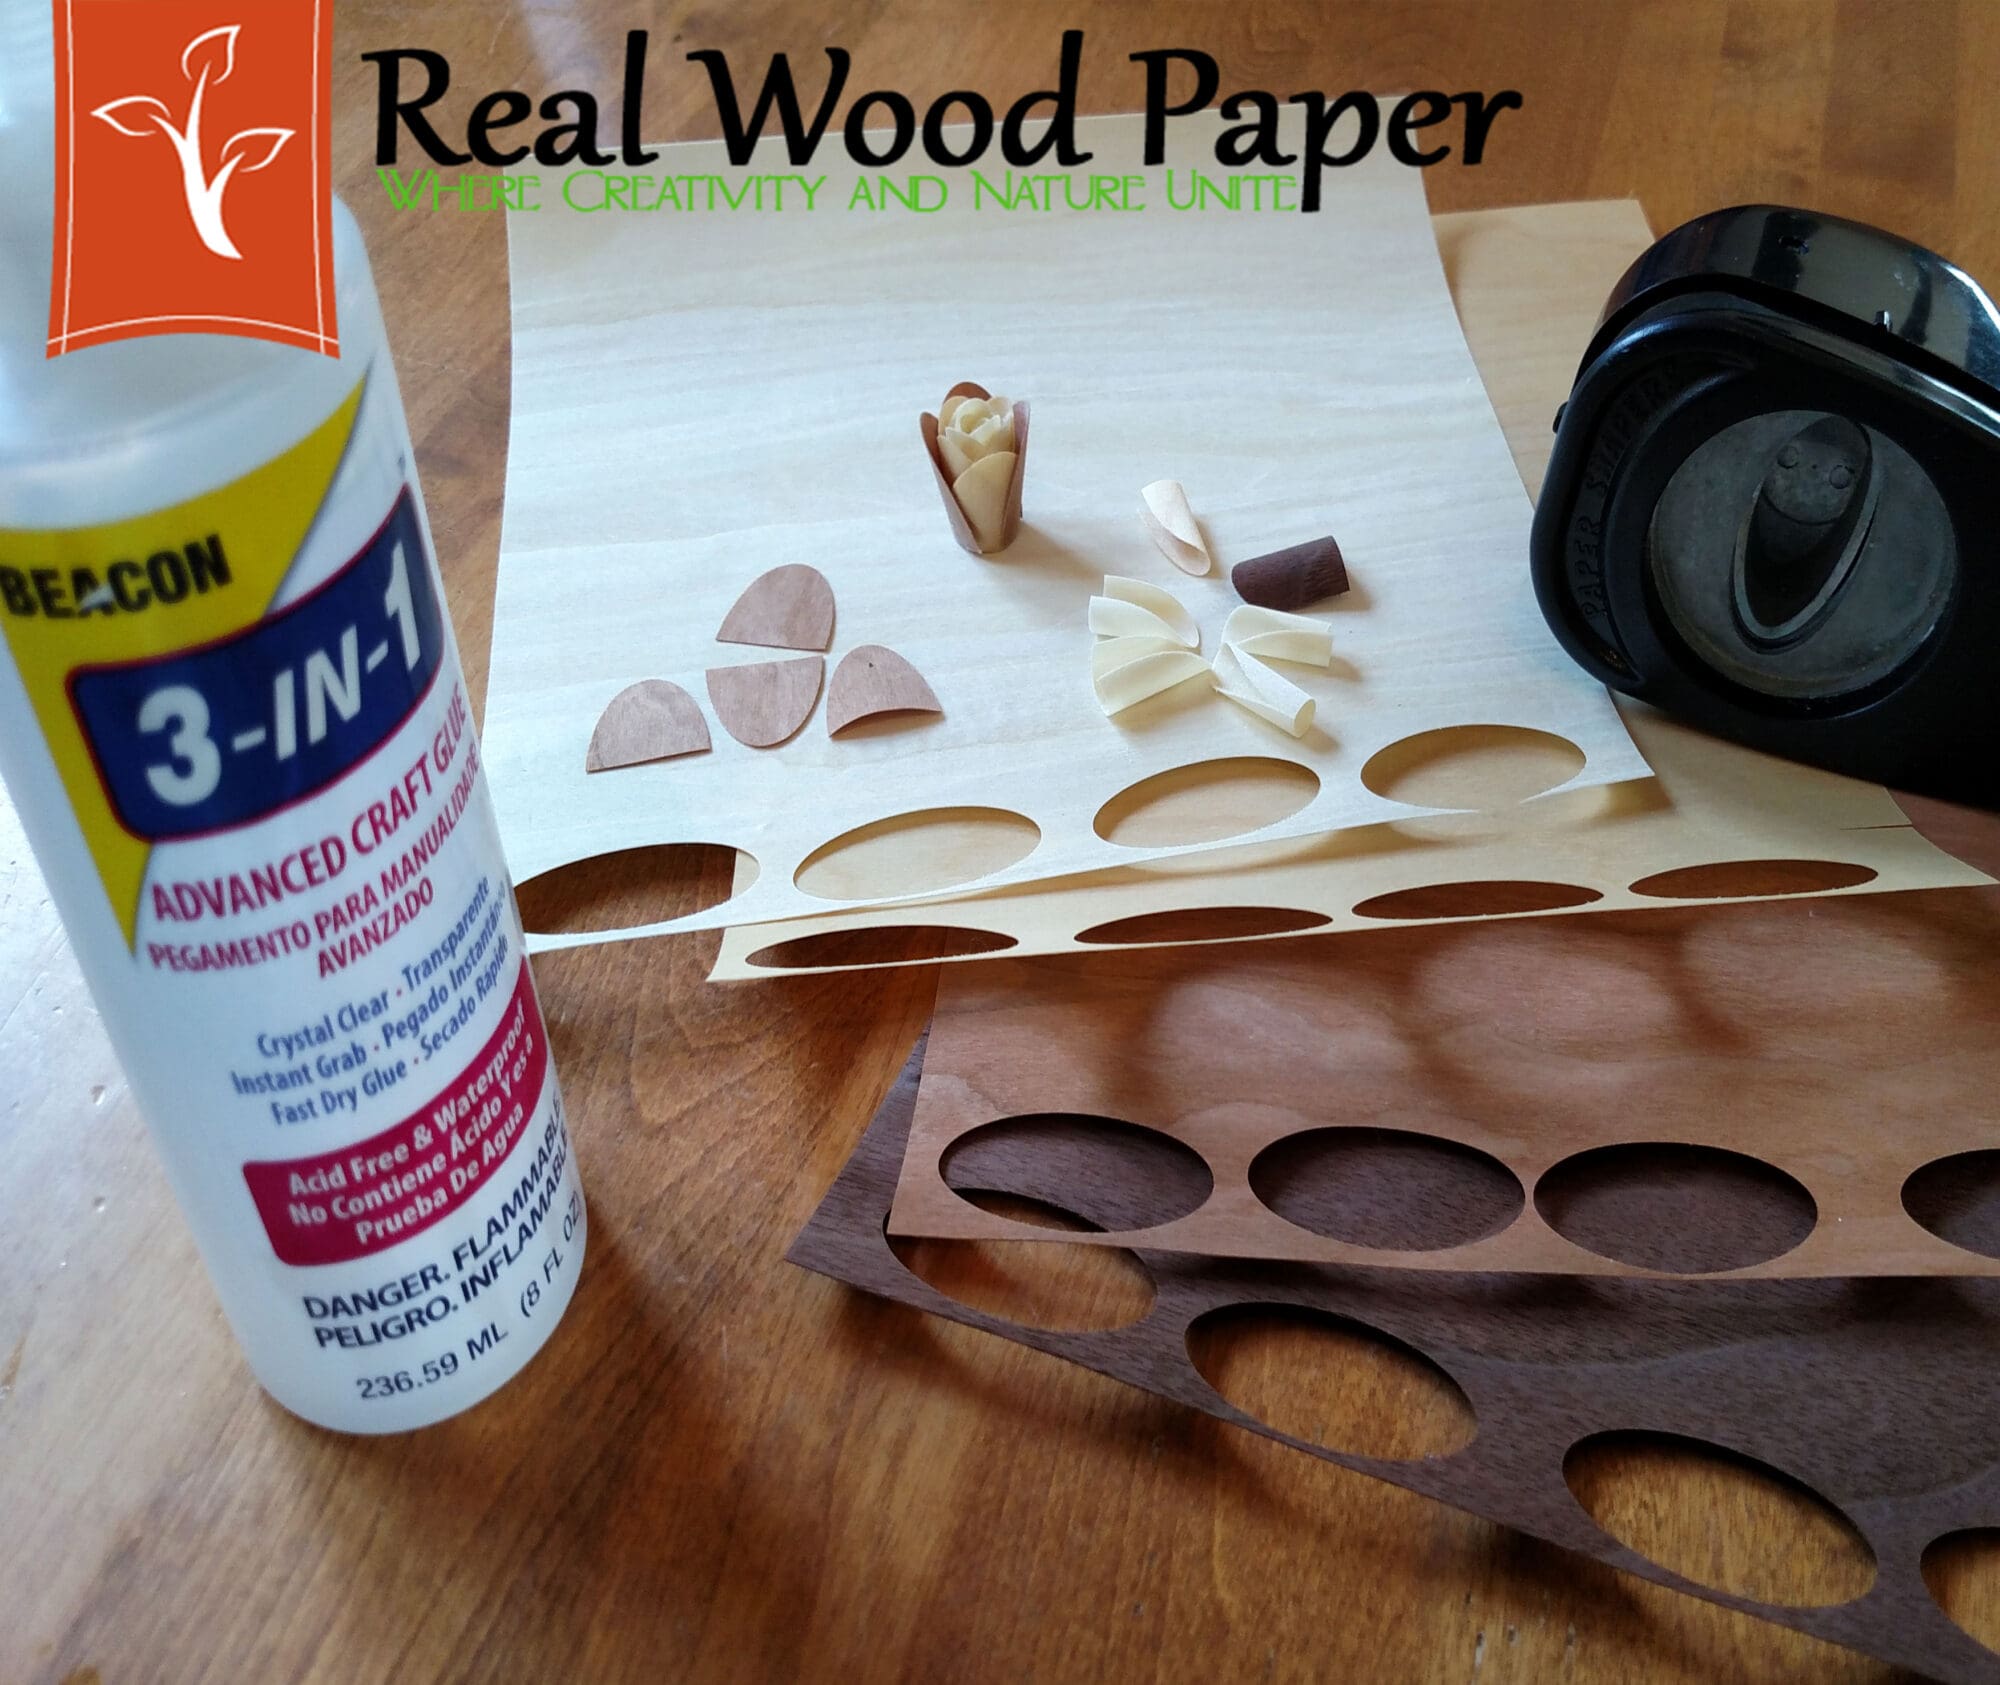 Glue and paper punch used on real wood paper sheets